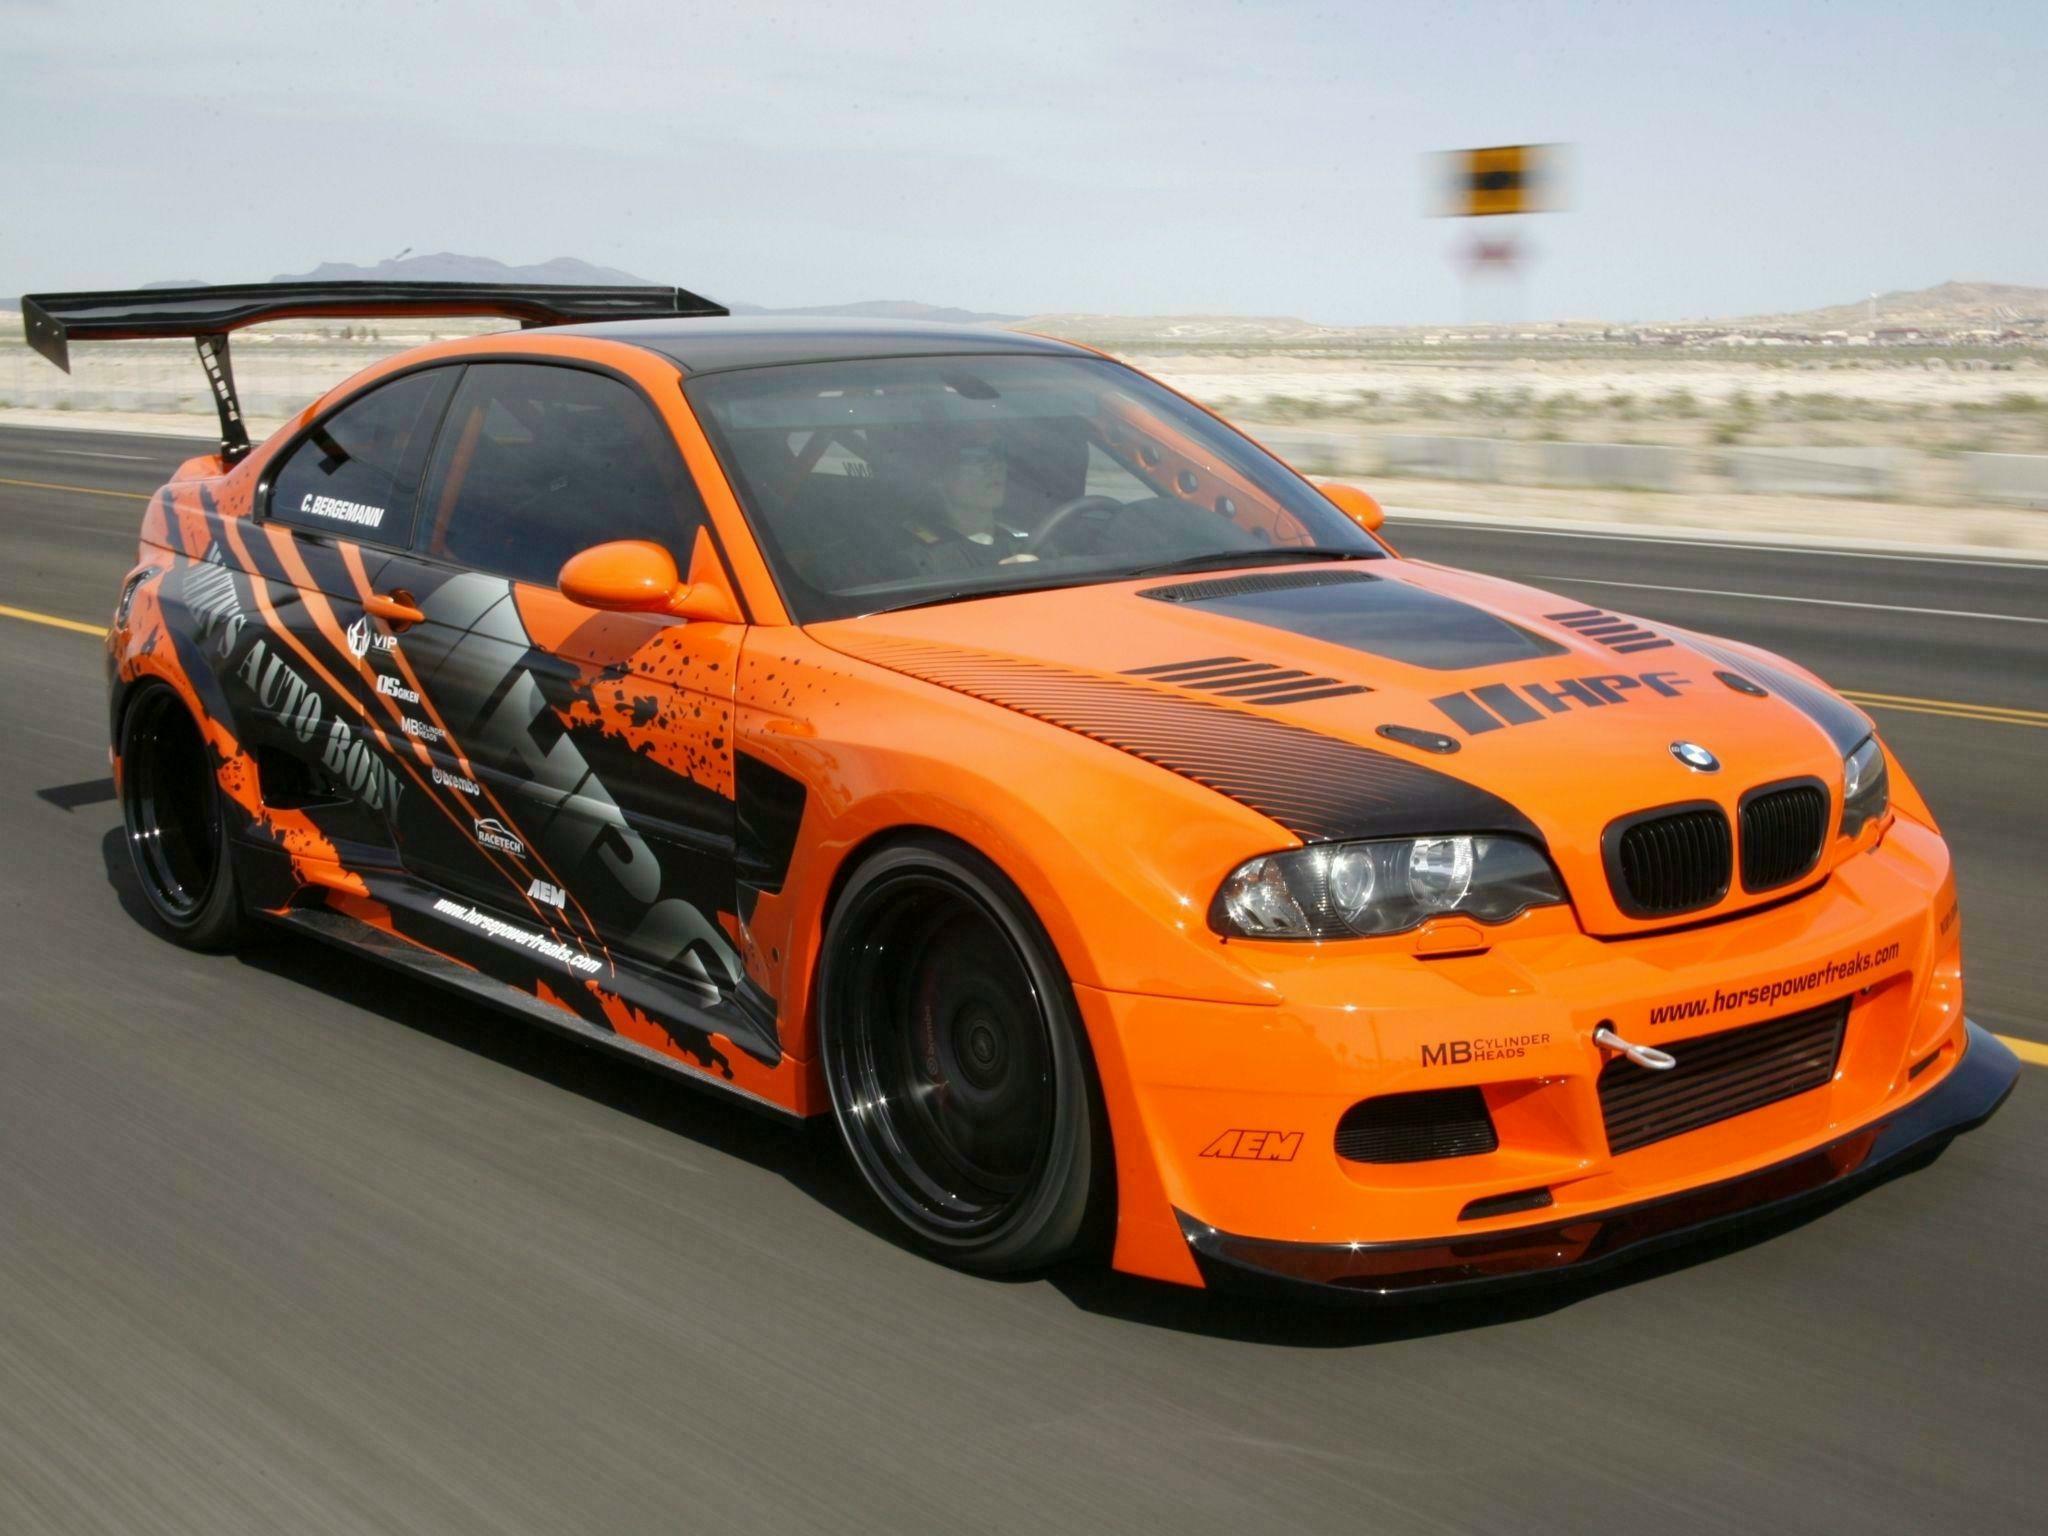 BMW E46 M3 GTR HD Wallpaper and Background Image. Photo